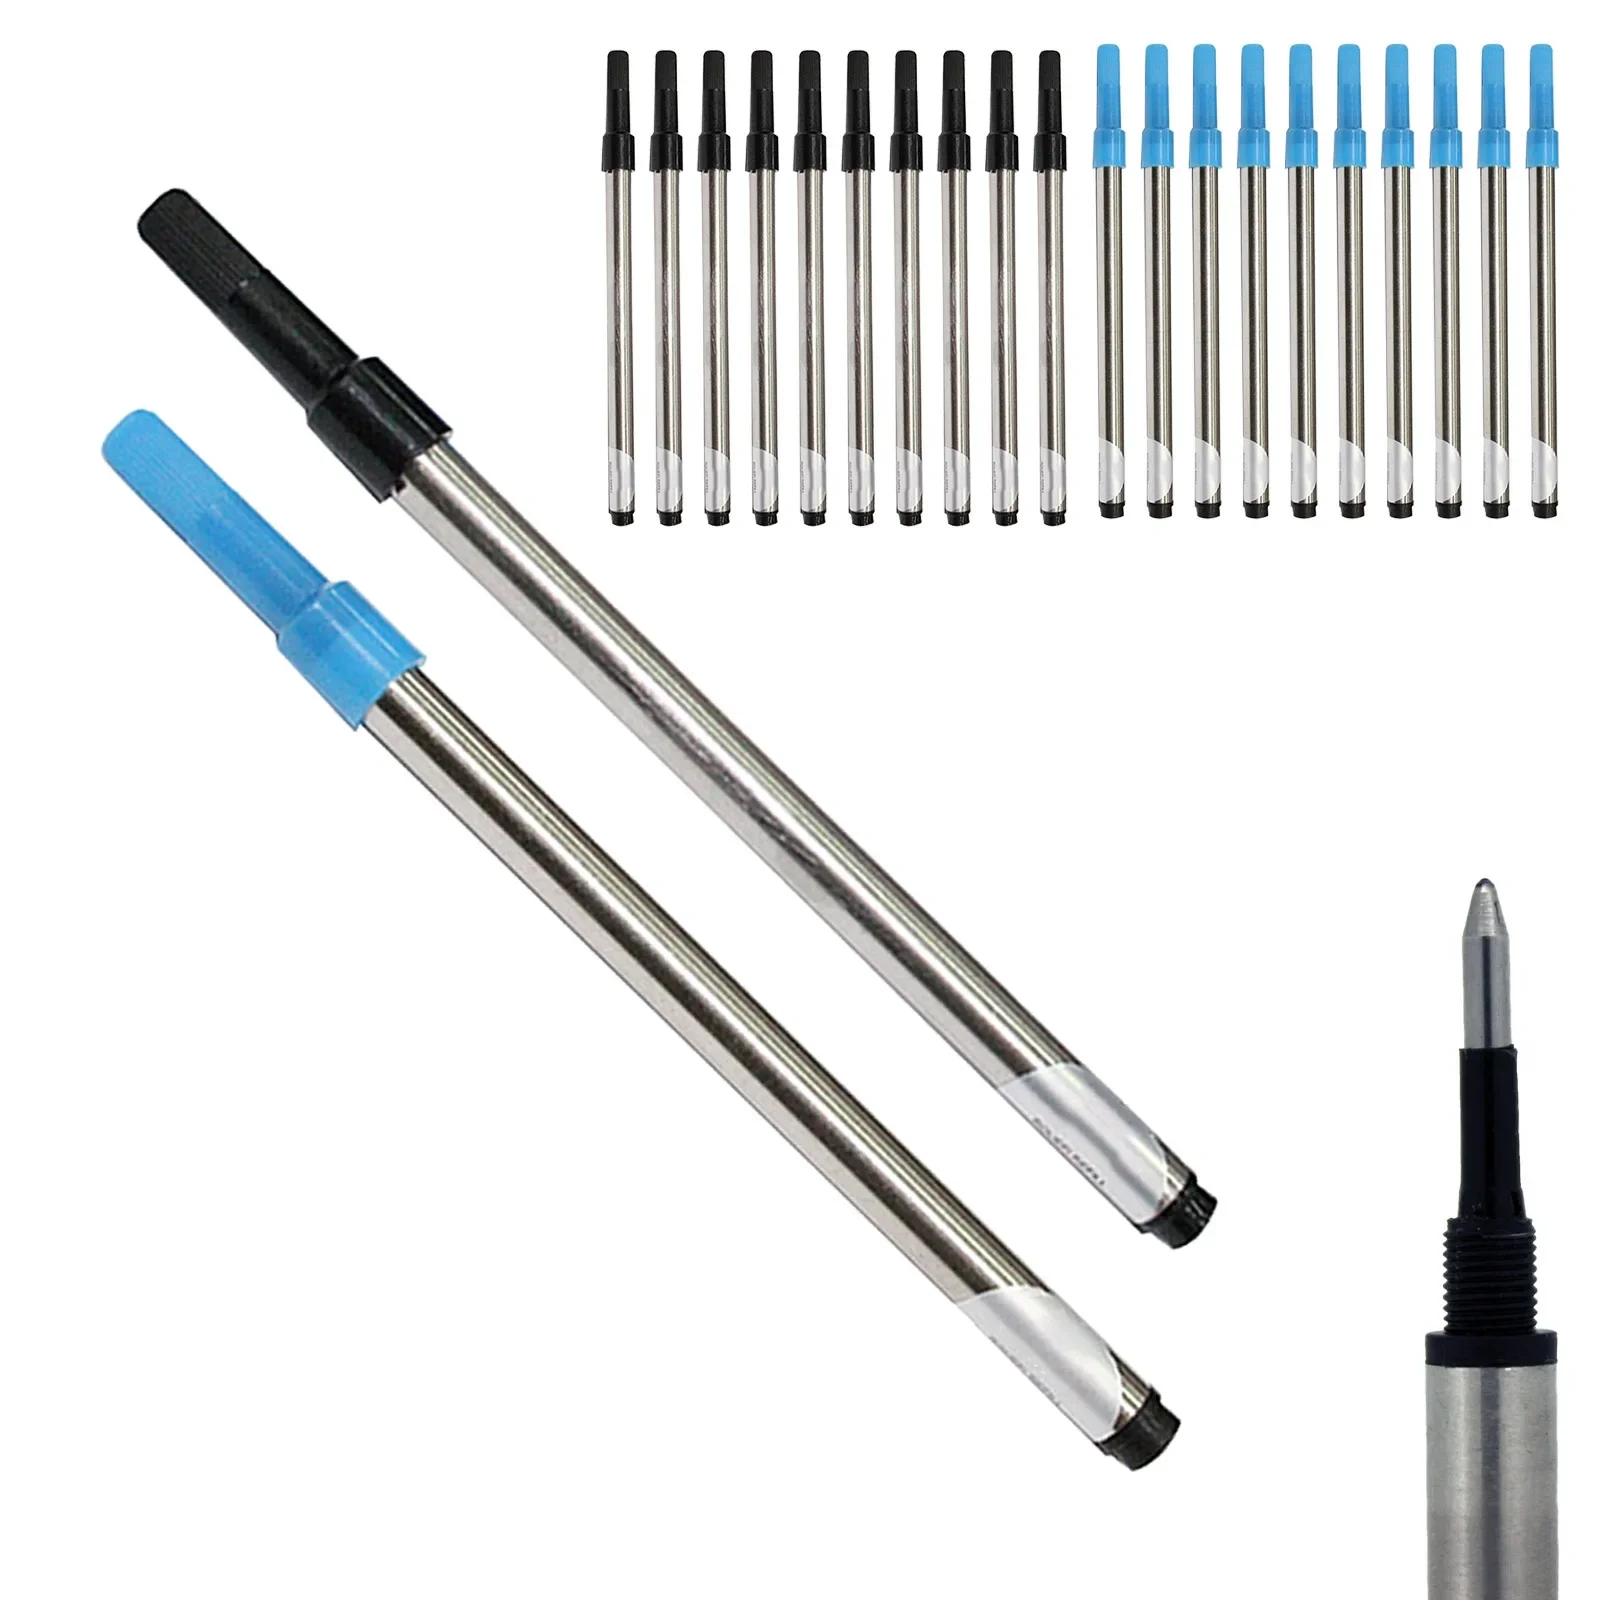 

10pcs\se Push Type 0.7mm Rollerball Pen Refills Blue Black Ink for jinhao pen school office business writing supplies stationery